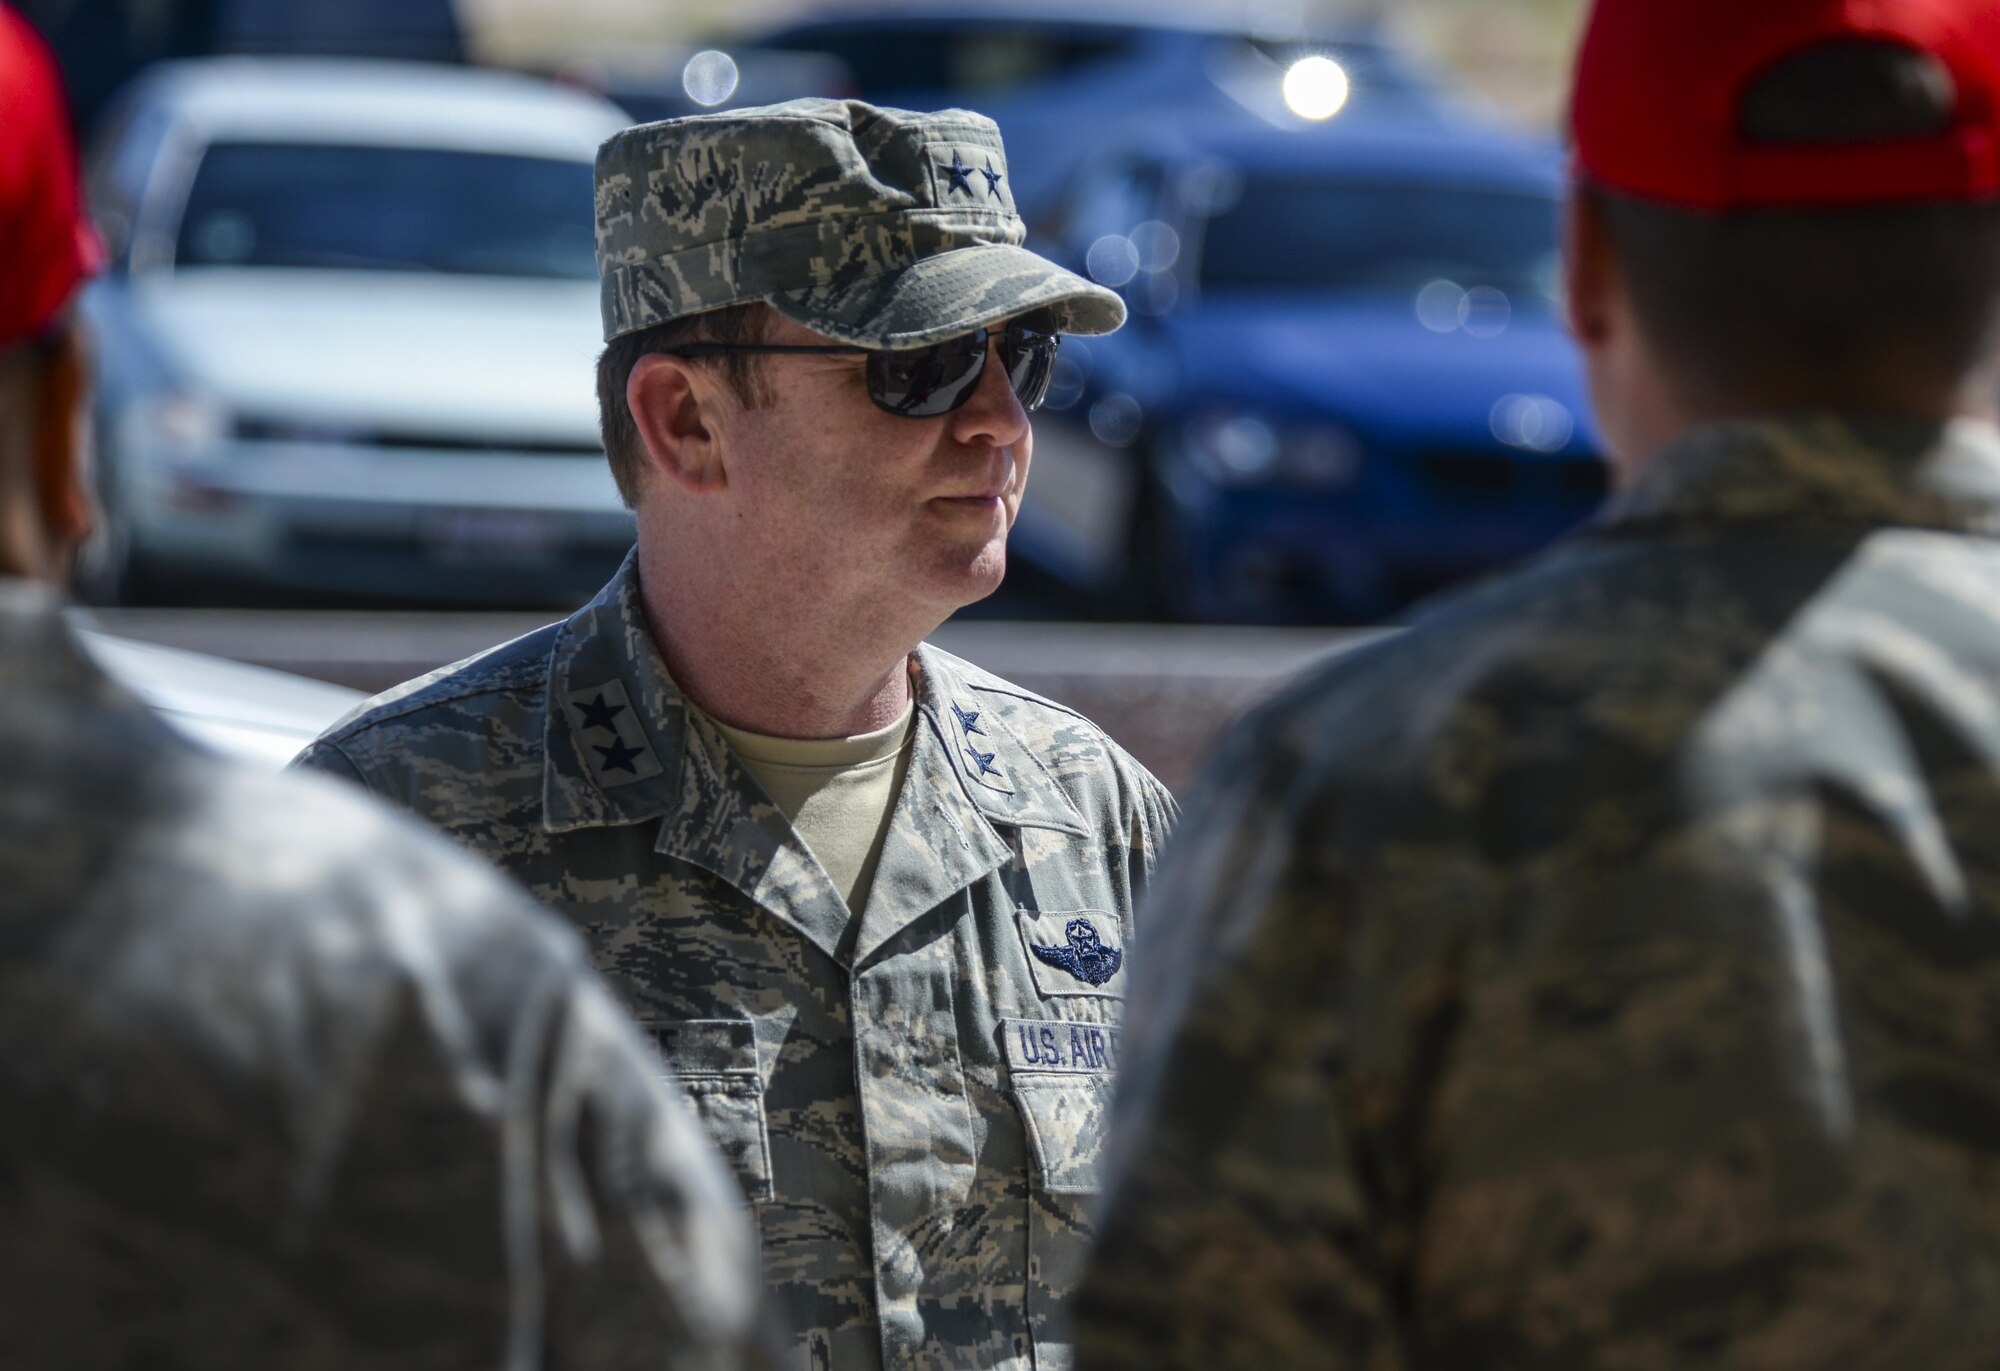 Maj. Gen. Richard Scobee, 10th Air Force Commander, visits the 555th Red Horse Squadron at Nellis Air Force Base, Nev., April 2, 2016. Scobee’s command includes all fighter, bomber, special operations, rescue, airborne warning and control, fighter and bomber flying-training missions, combat air operations battle staff, remotely-piloted aircraft, space, and cyber units in the Air Force Reserve Command. (U.S. Air Force photo by Airman 1st Class Kevin Tanenbaum)